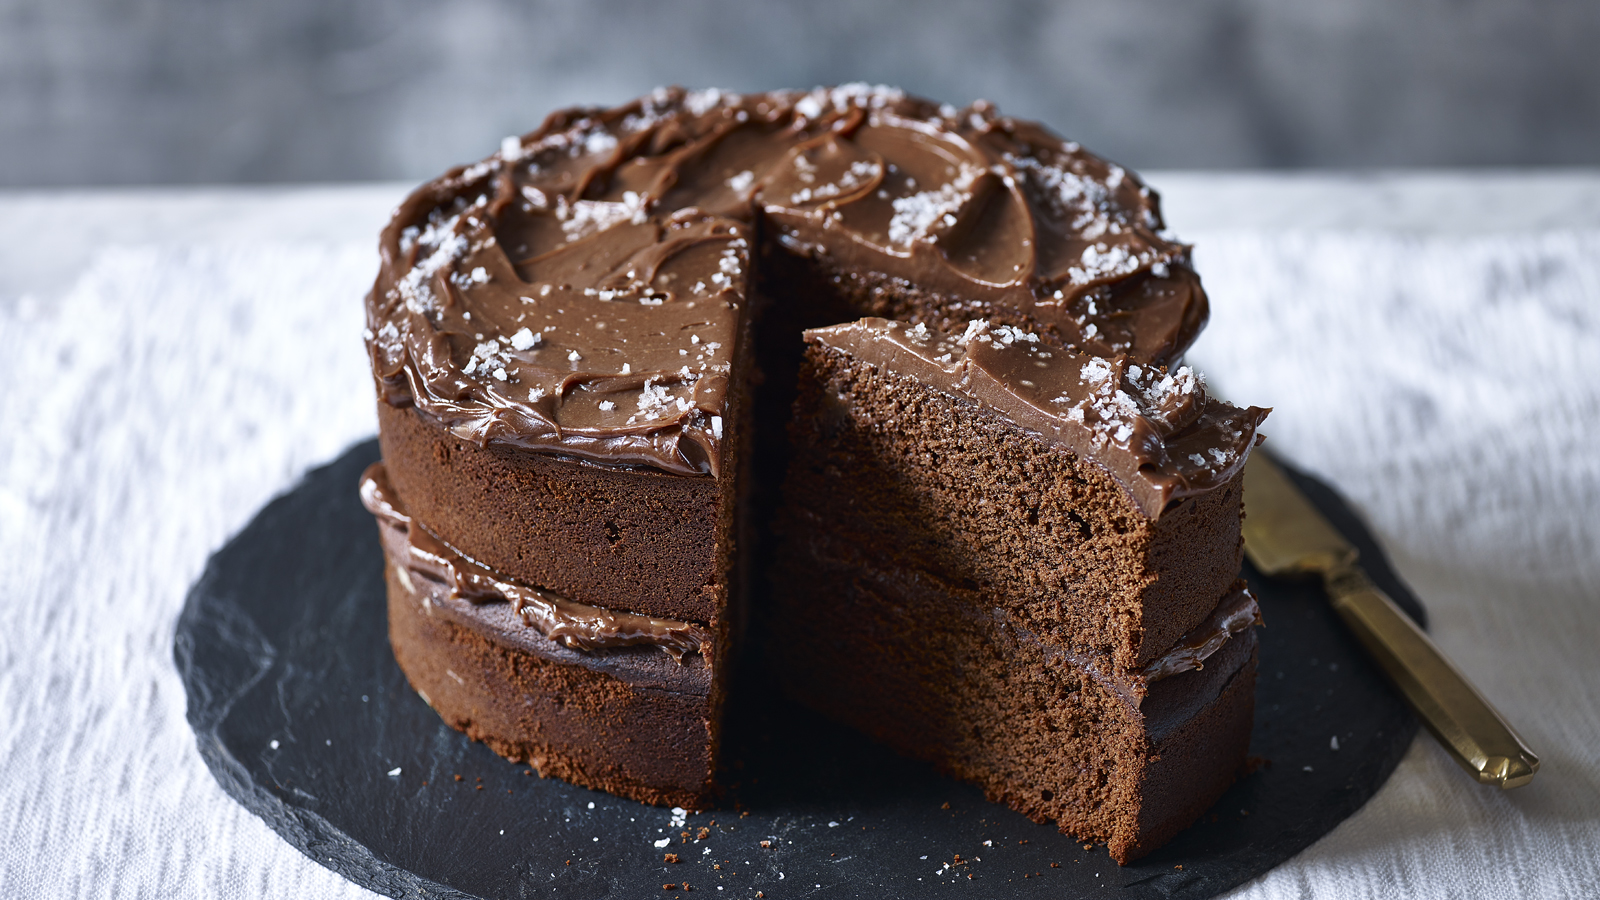 Triple chocolate & peanut butter layer cake - BBC Good Food Middle East